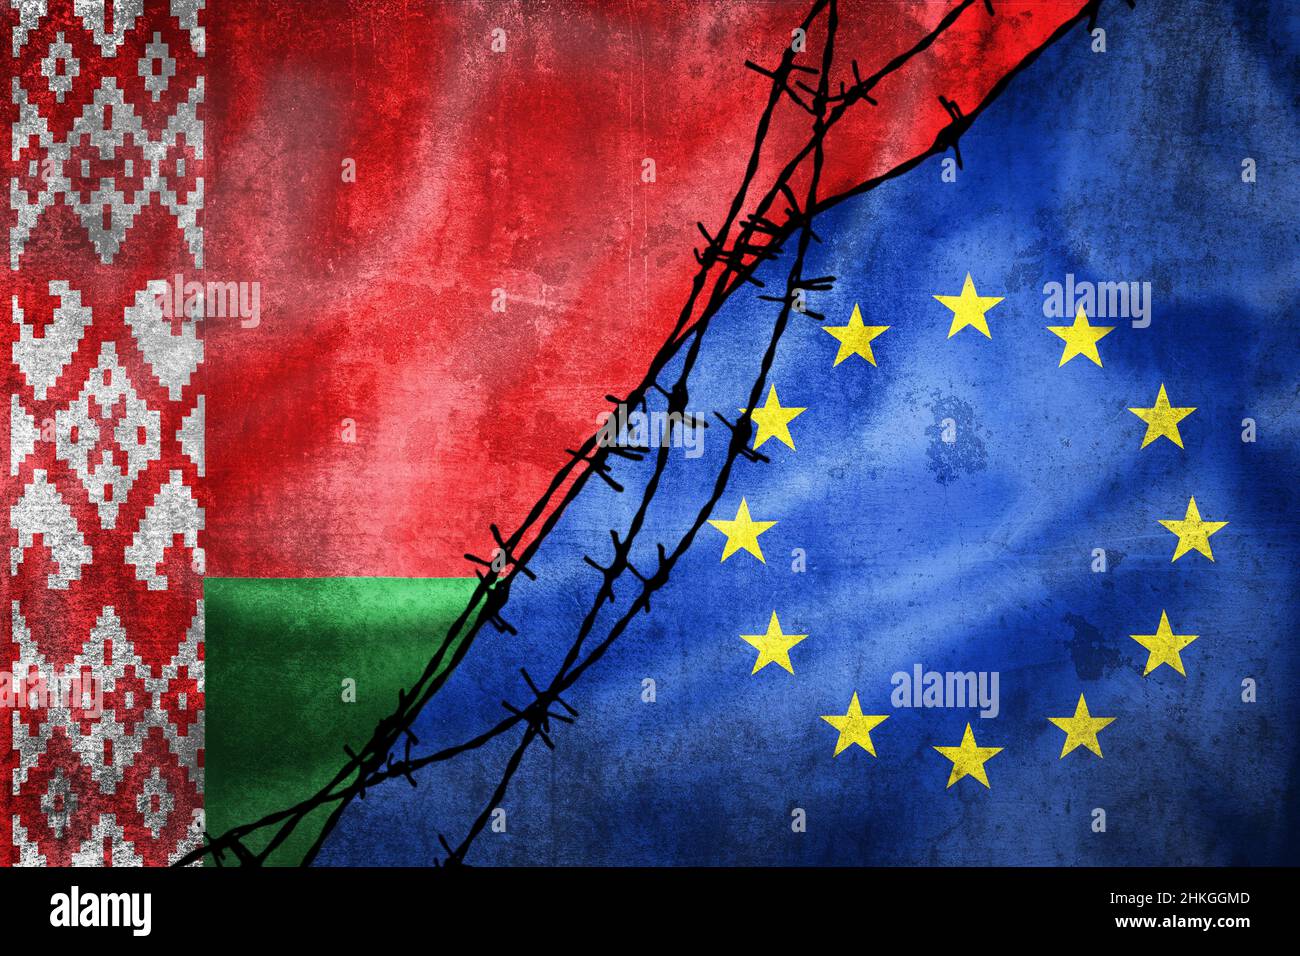 Grunge flags of Belarus and European Union divided by barb wire illustration, concept of tense relations in migrant border crisis Stock Photo